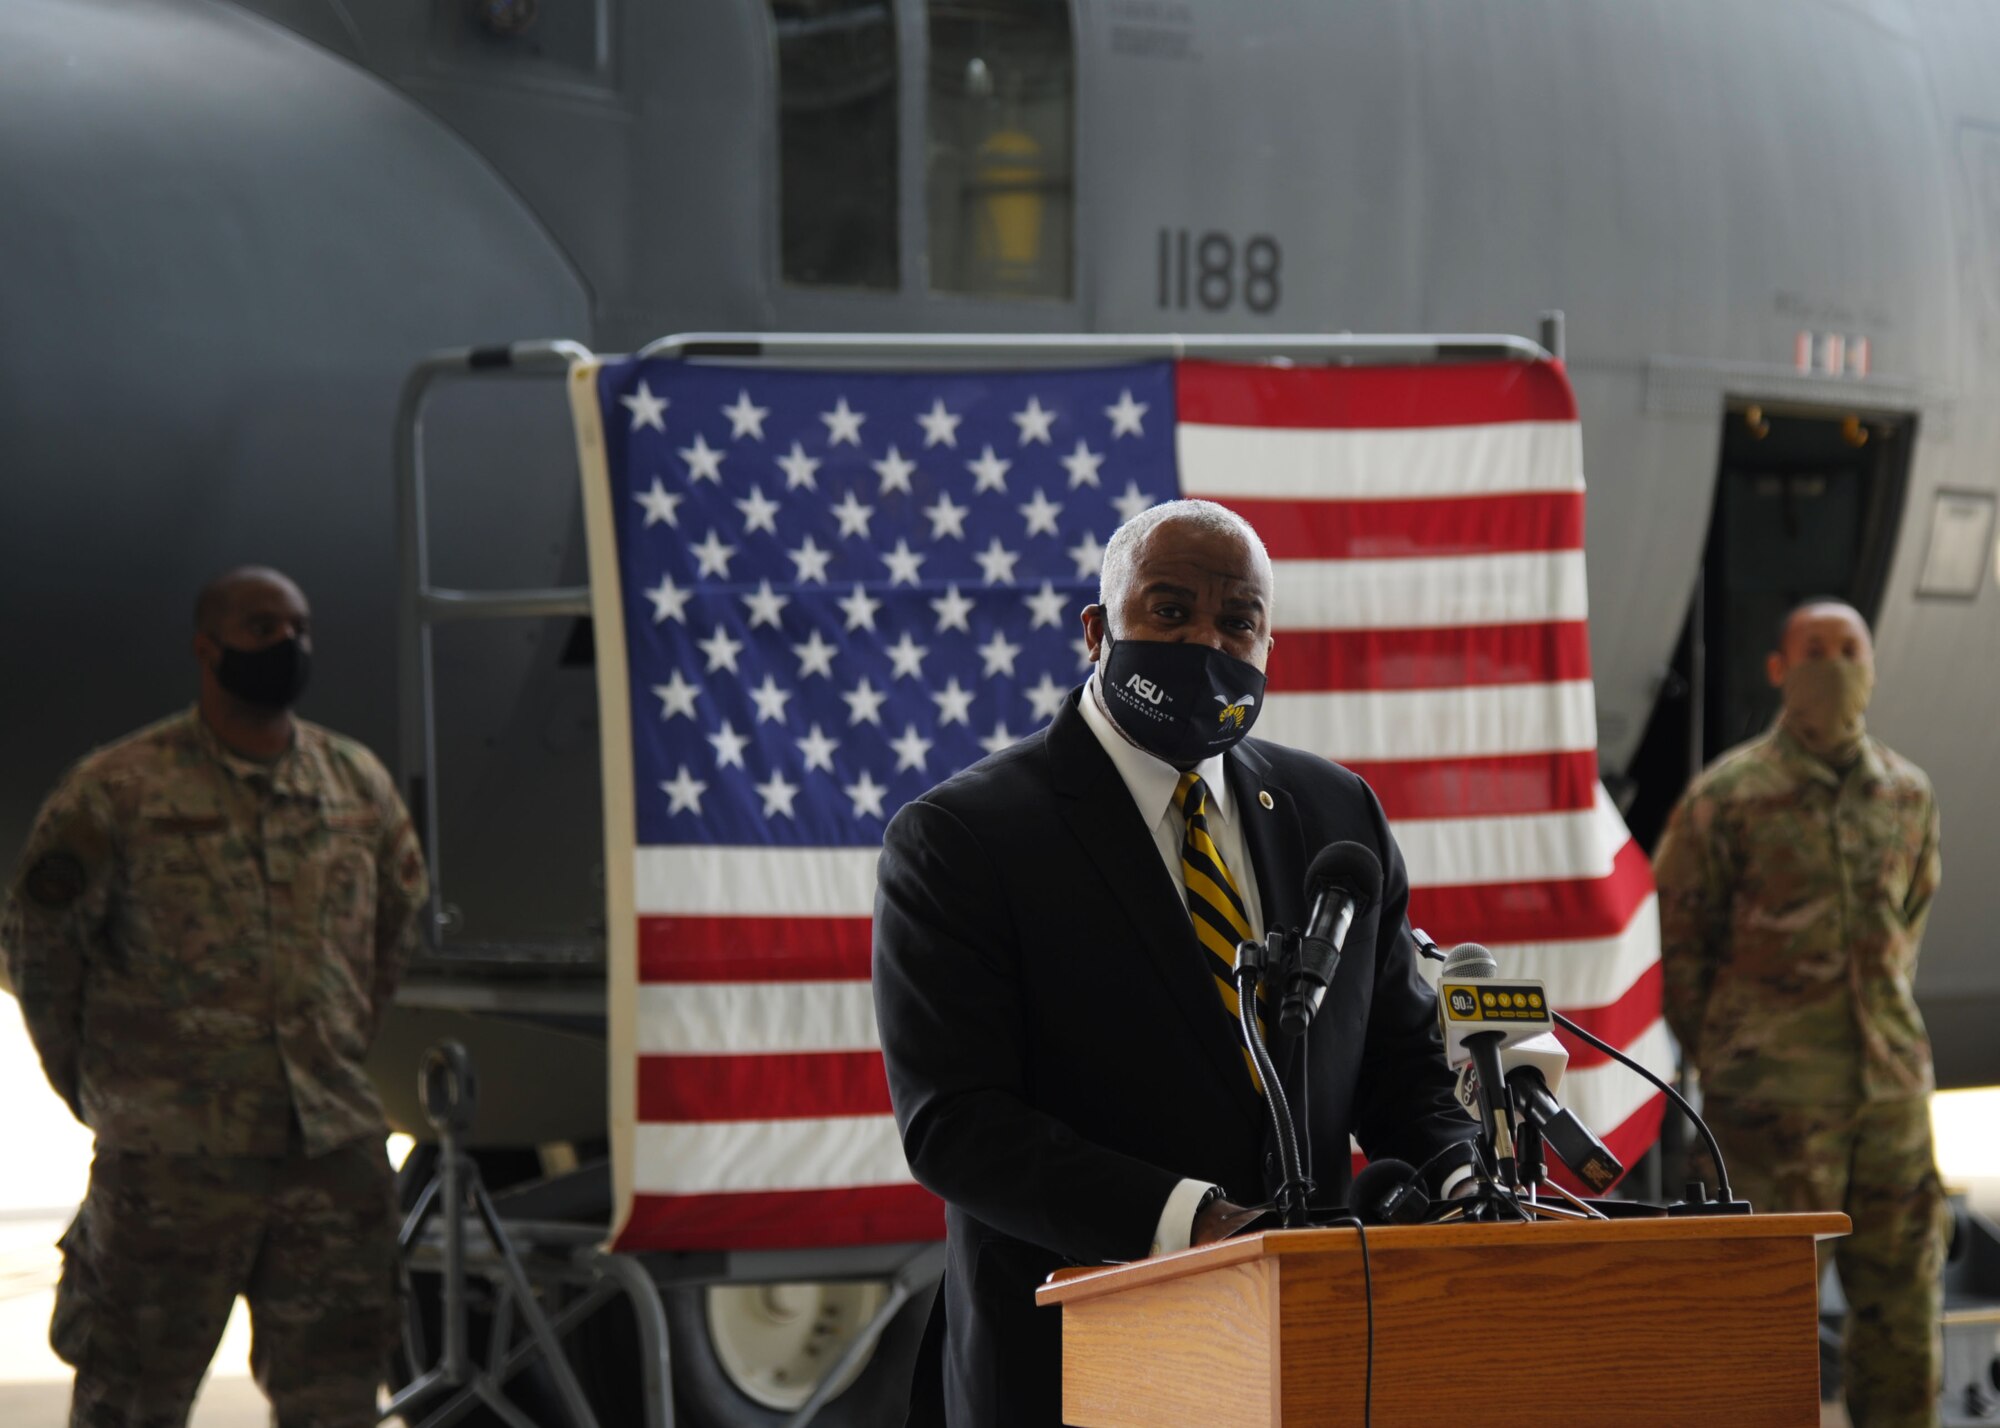 Dr. Quinton T. Ross Jr., president of Alabama State University, addresses the crowd at the nose art unveiling ceremony held at Maxwell Air Force Base, Alabama. The 908th Airlift Wing commemorated its partnership with ASU by painting the university’s logo on the nose of one of its C-130 H aircraft. (U.S. Air Force photo by Senior Airman Max Goldberg)